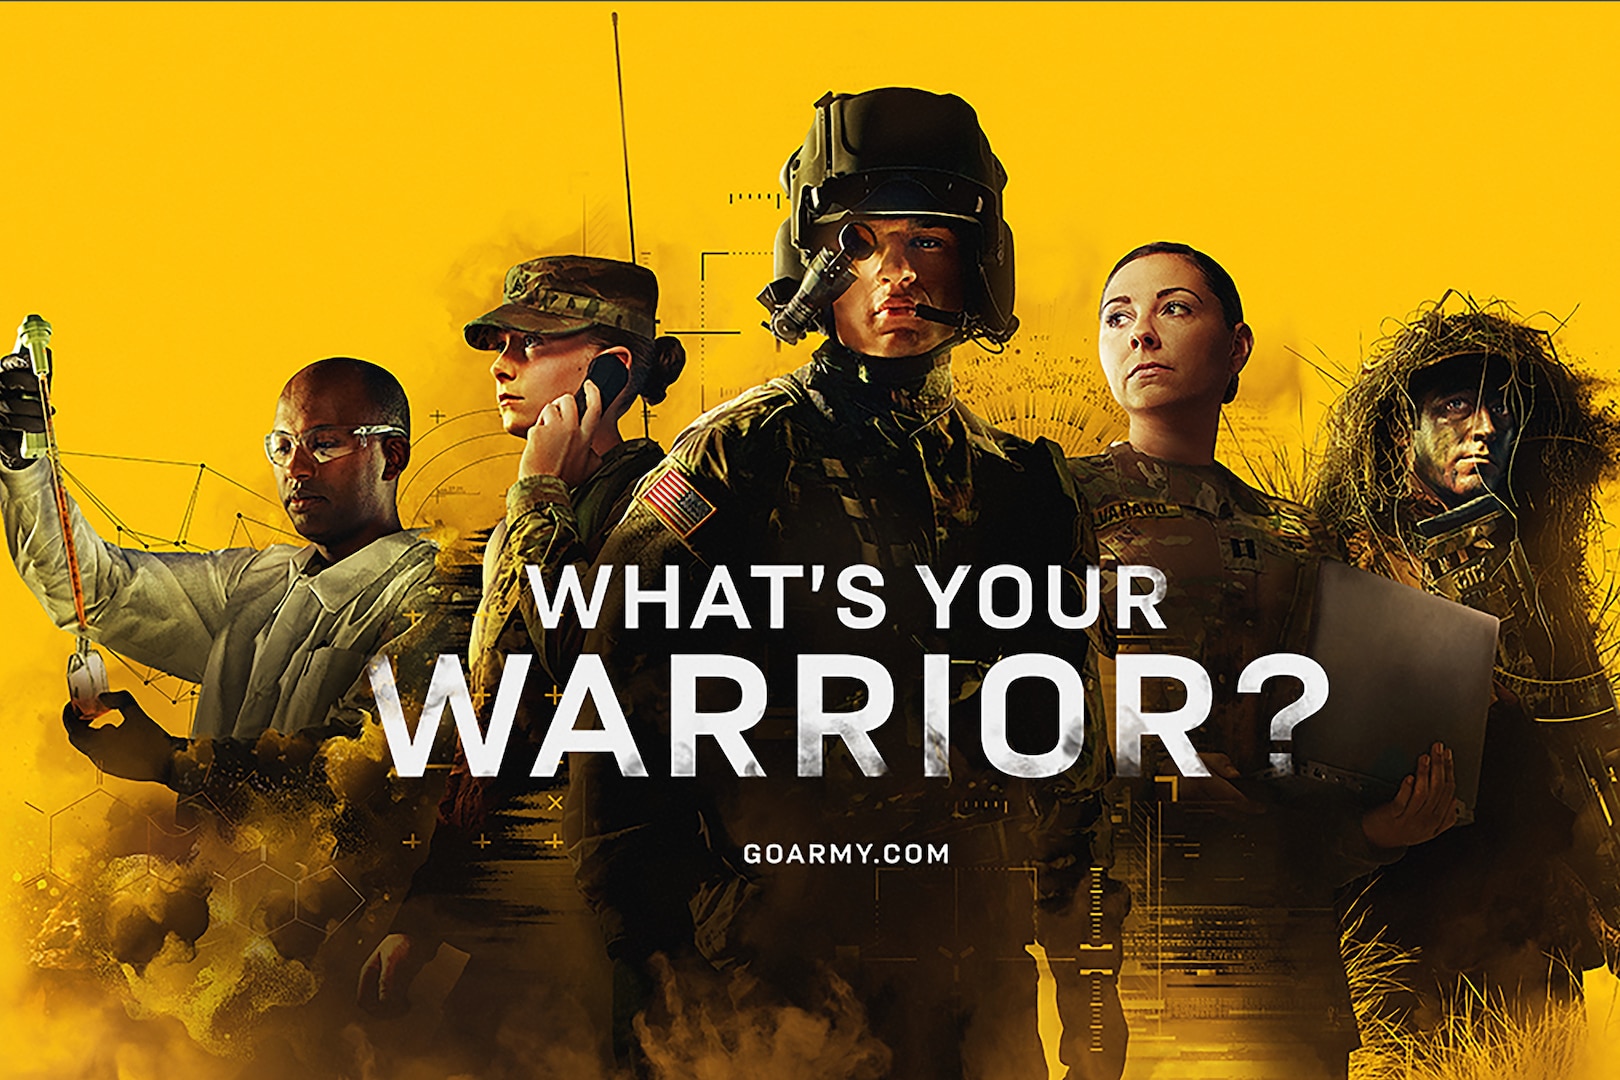 What's Your Warrior is the Army's latest marketing strategy, aimed at 17-to-24-year-olds, known as Generation Z, by looking beyond traditional combat roles and sharing the wide-array of diverse opportunities available through Army service.